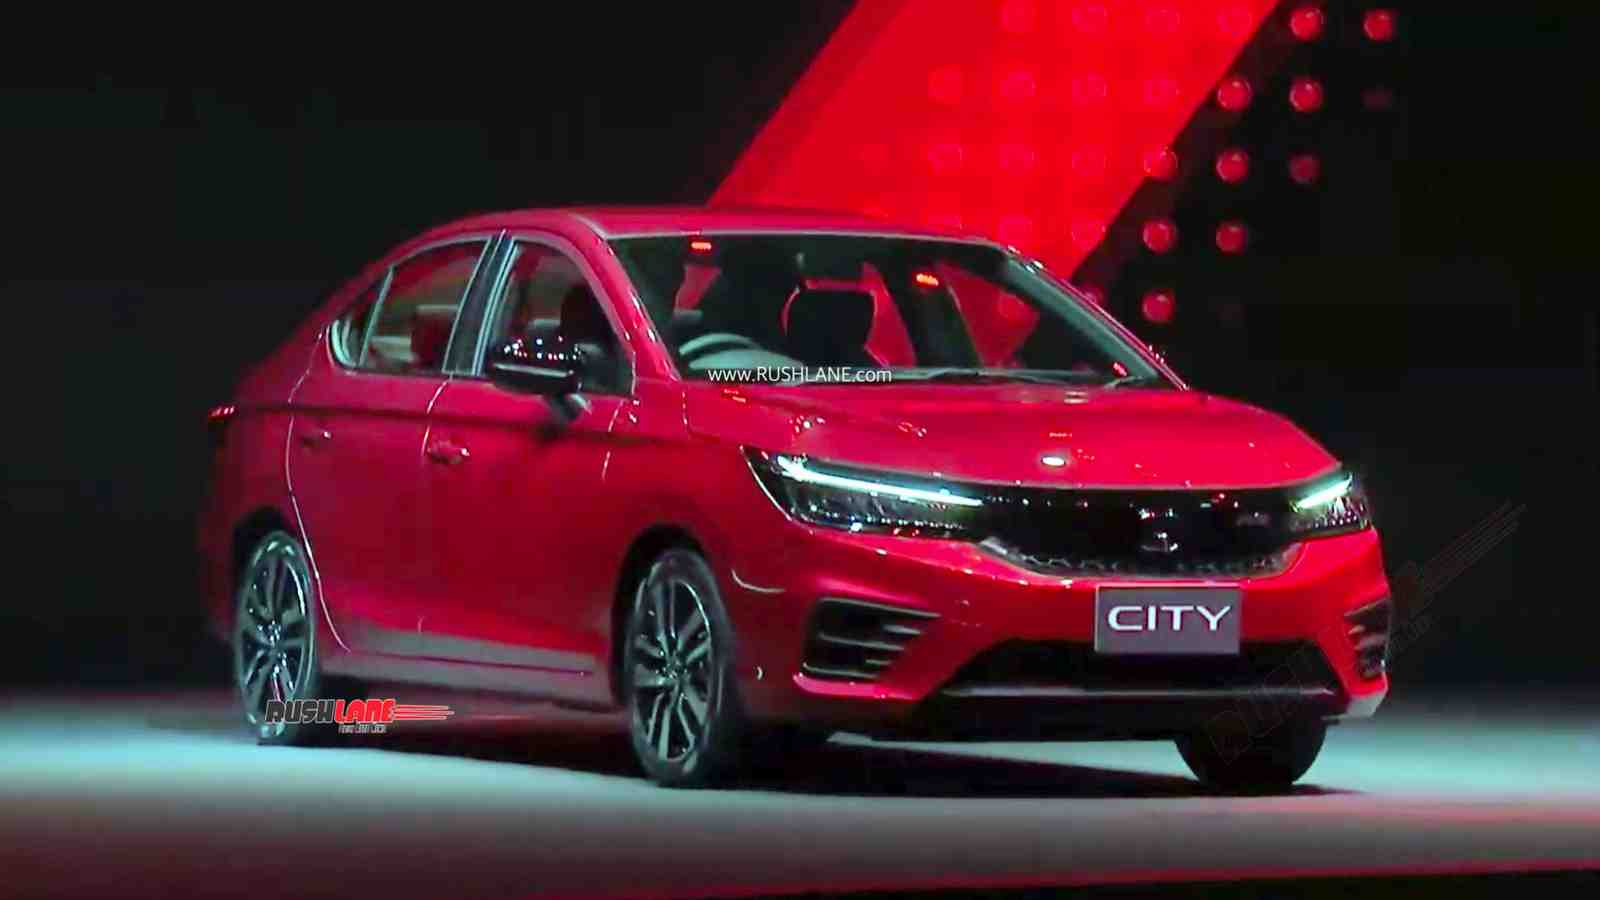 2020 Honda City RS TURBO 1 liter launched - Price ...